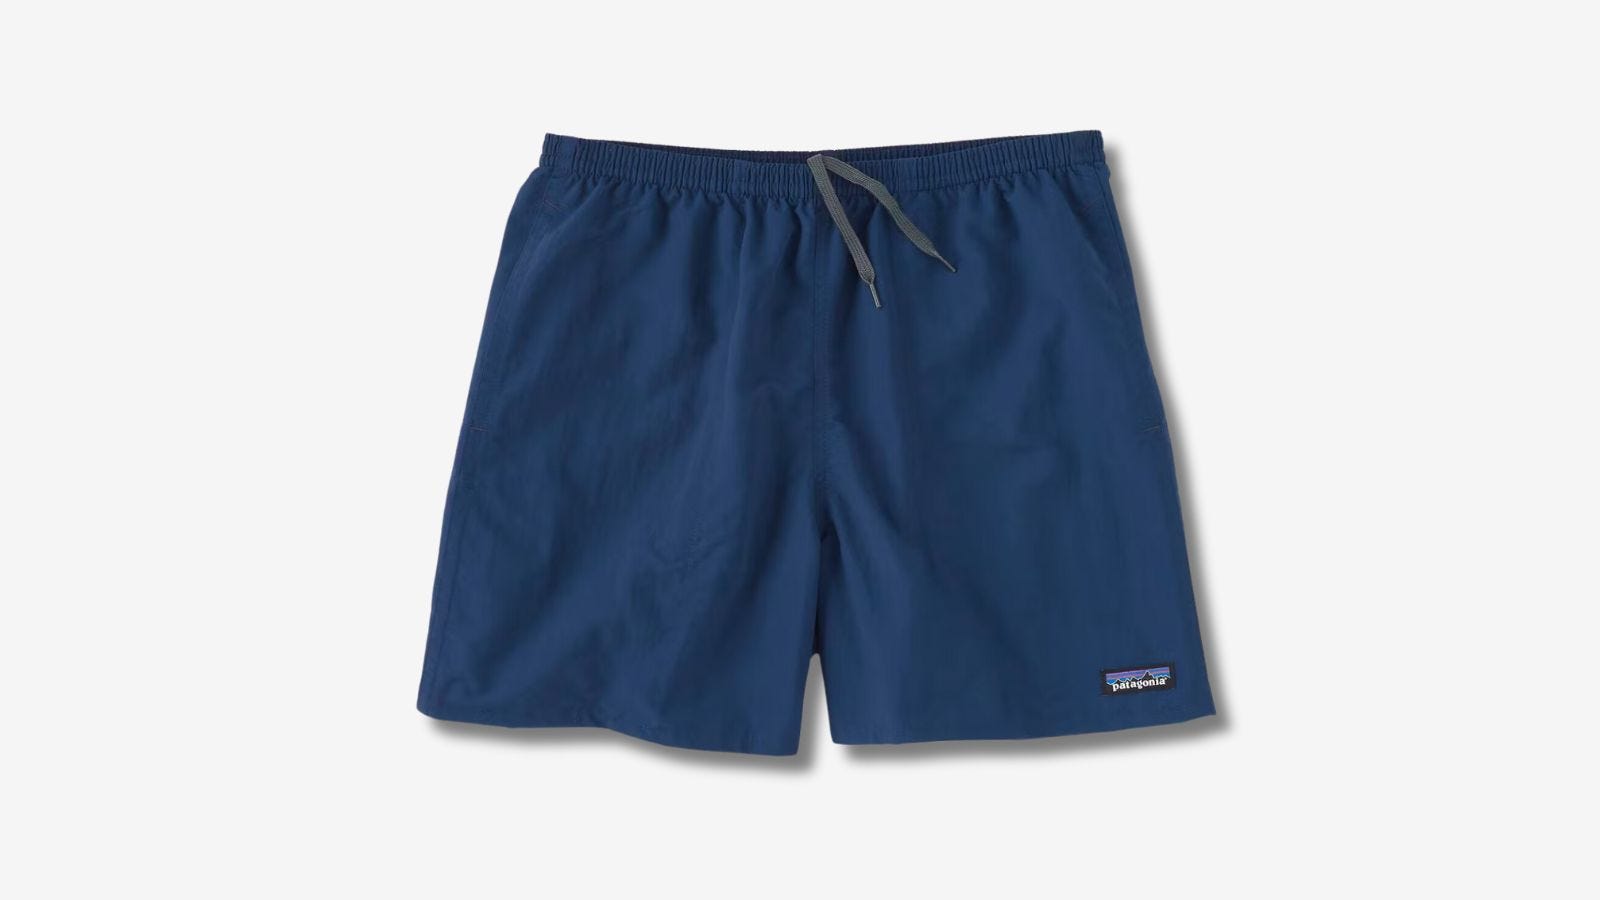 pair of navy patagonia baggies shorts against a blank background